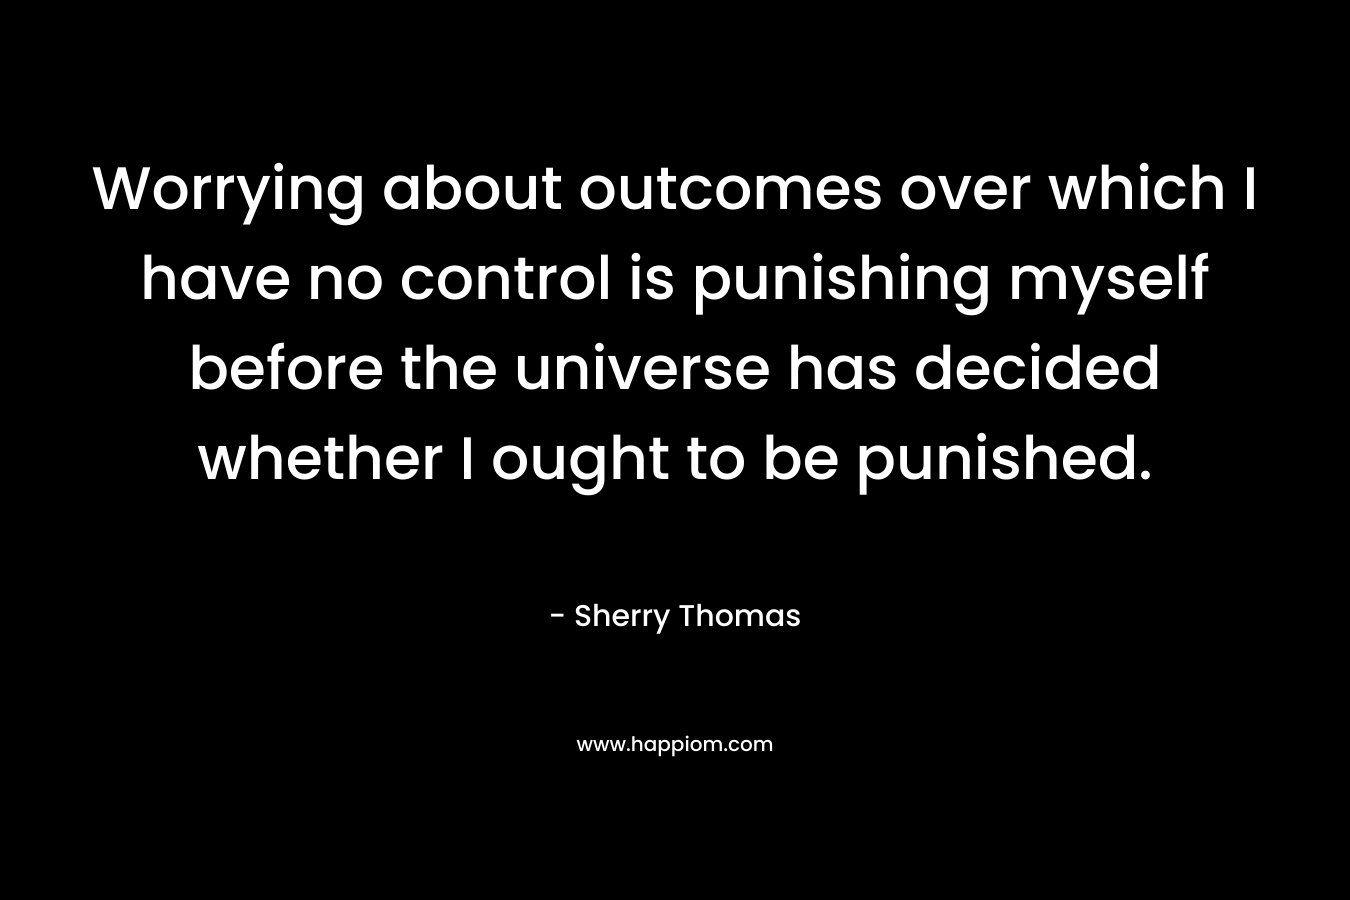 Worrying about outcomes over which I have no control is punishing myself before the universe has decided whether I ought to be punished.